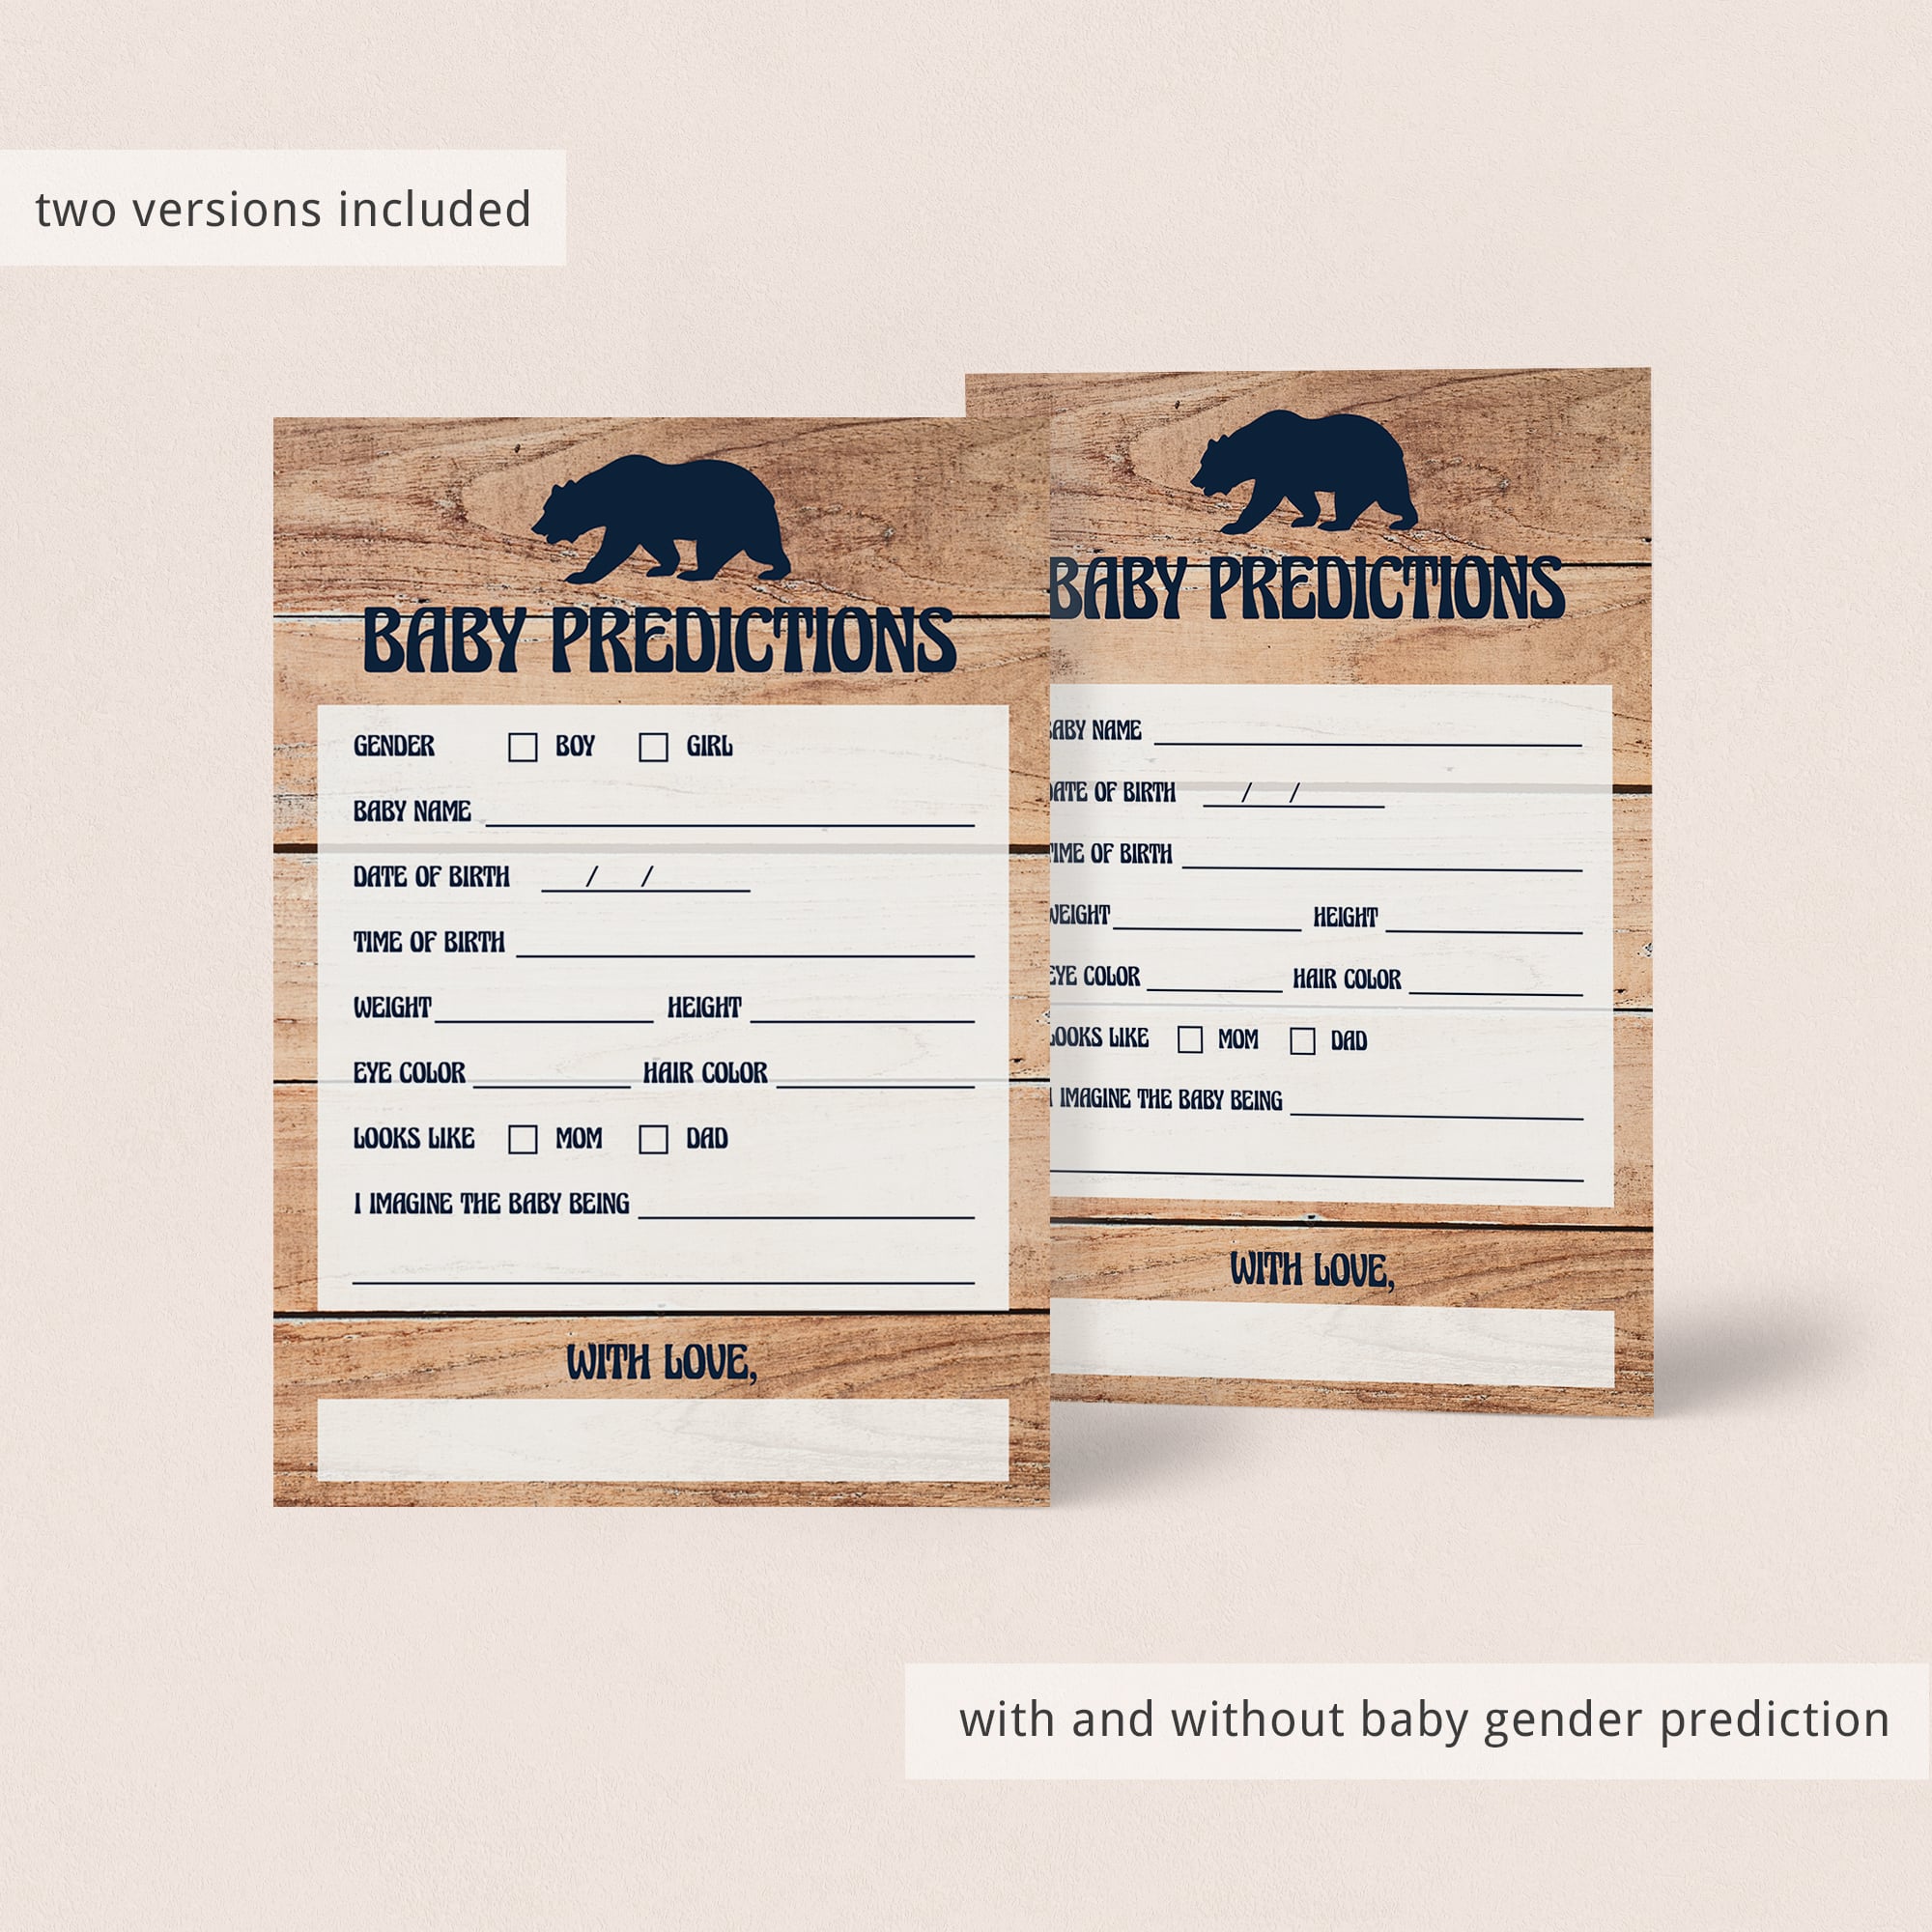 Baby birth stats predictions game for baby shower by LittleSizzle